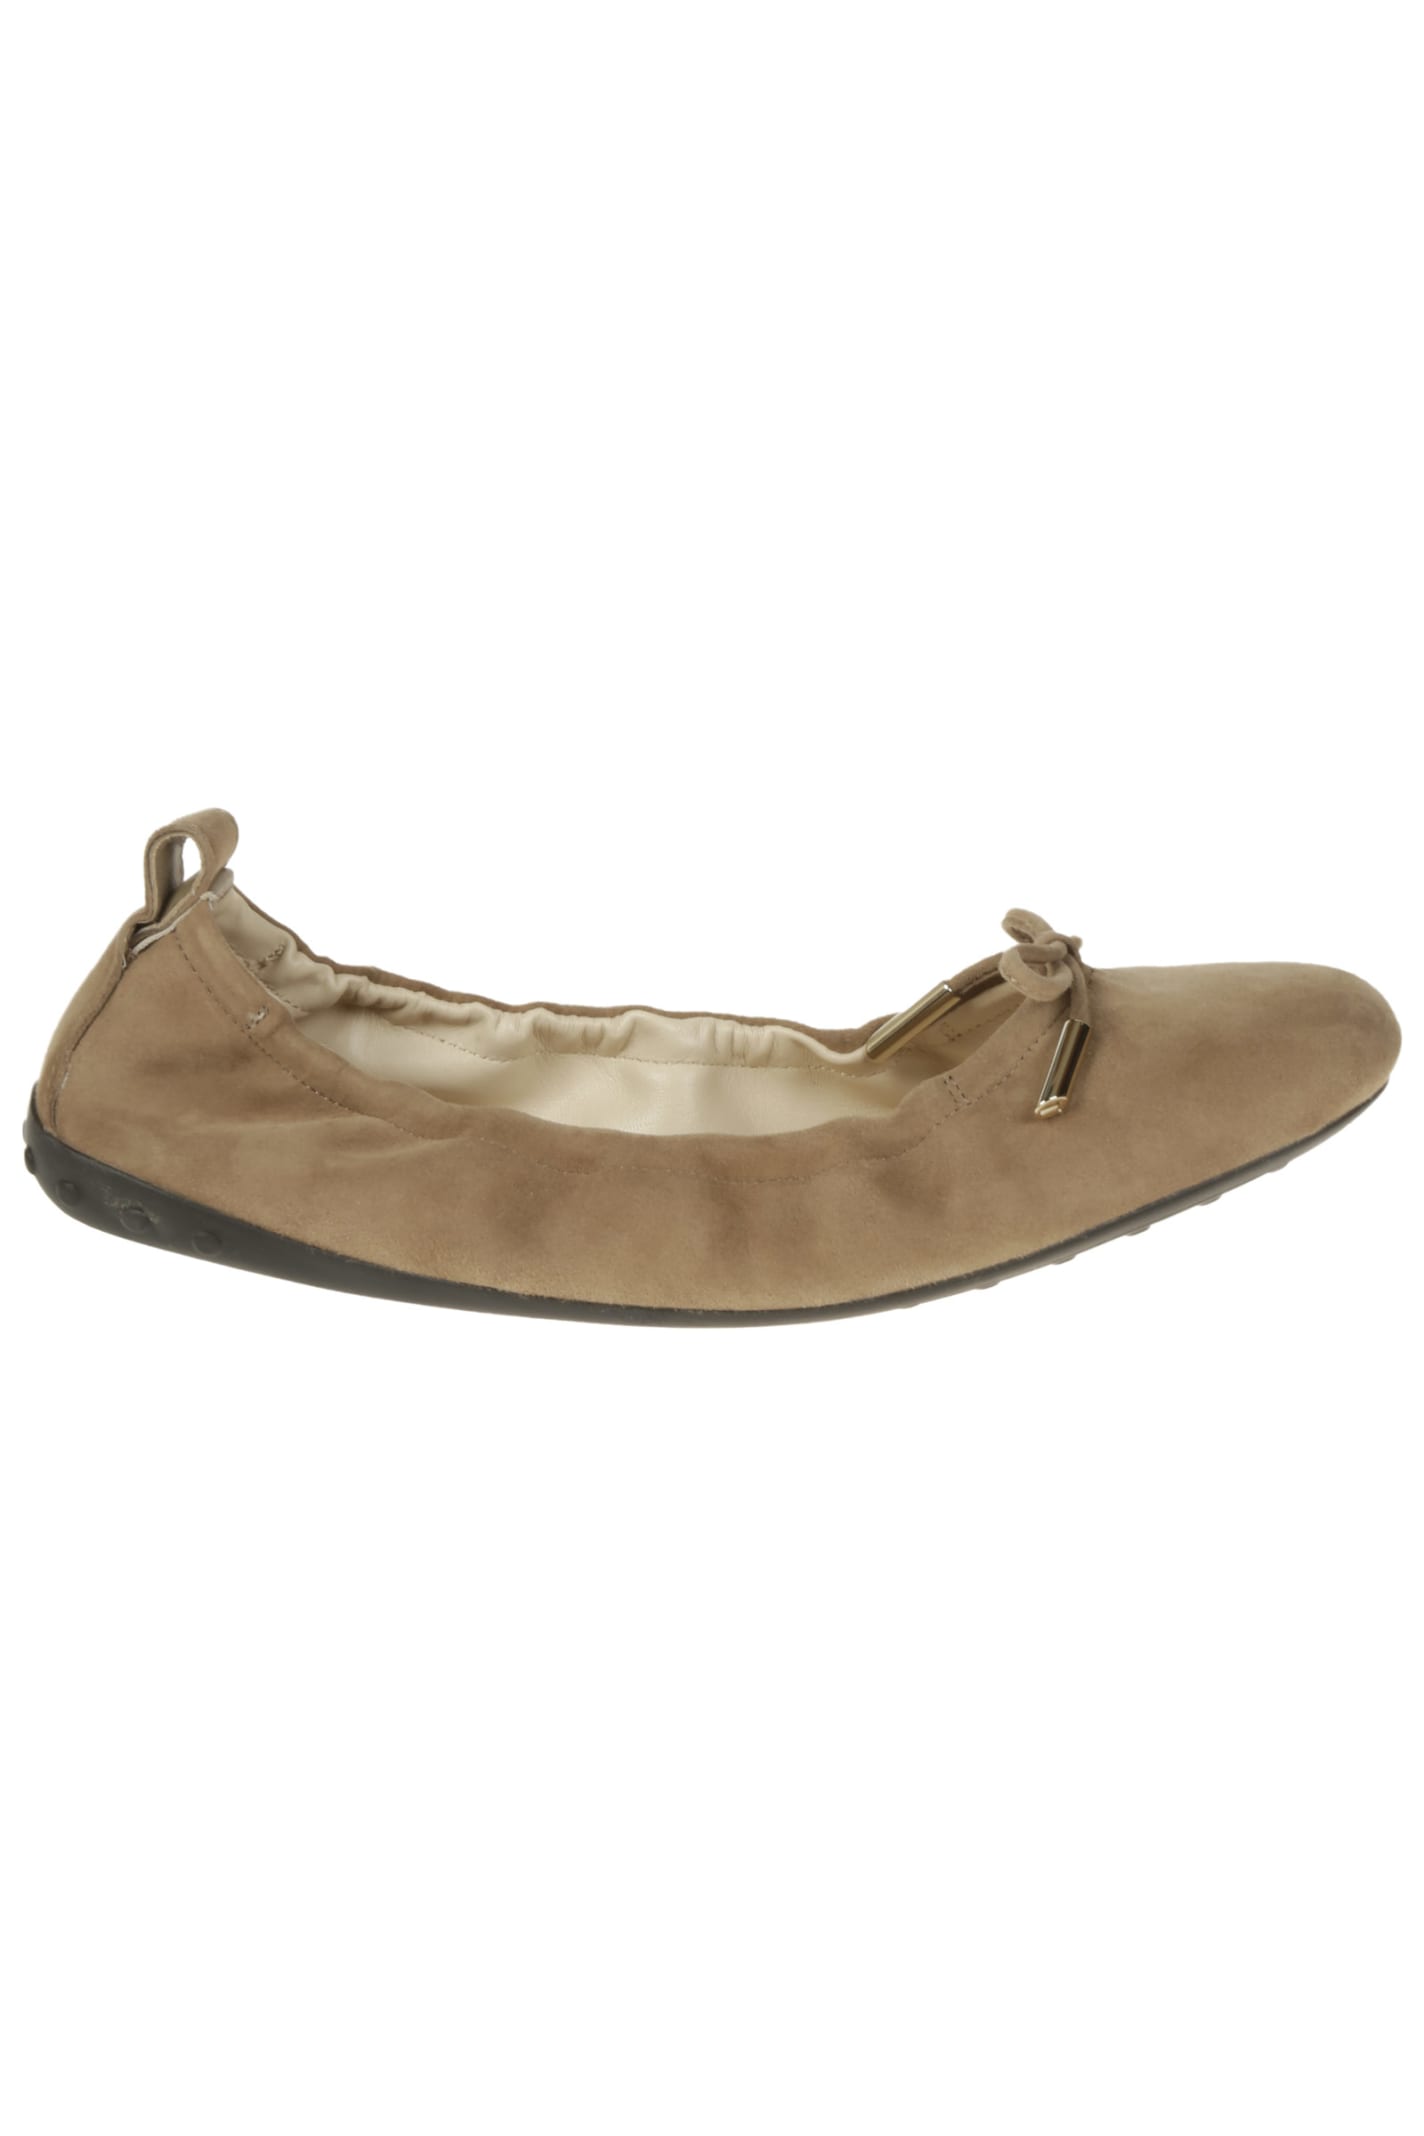 Buy Tods Bow-tie Detail Ballerinas online, shop Tods shoes with free shipping